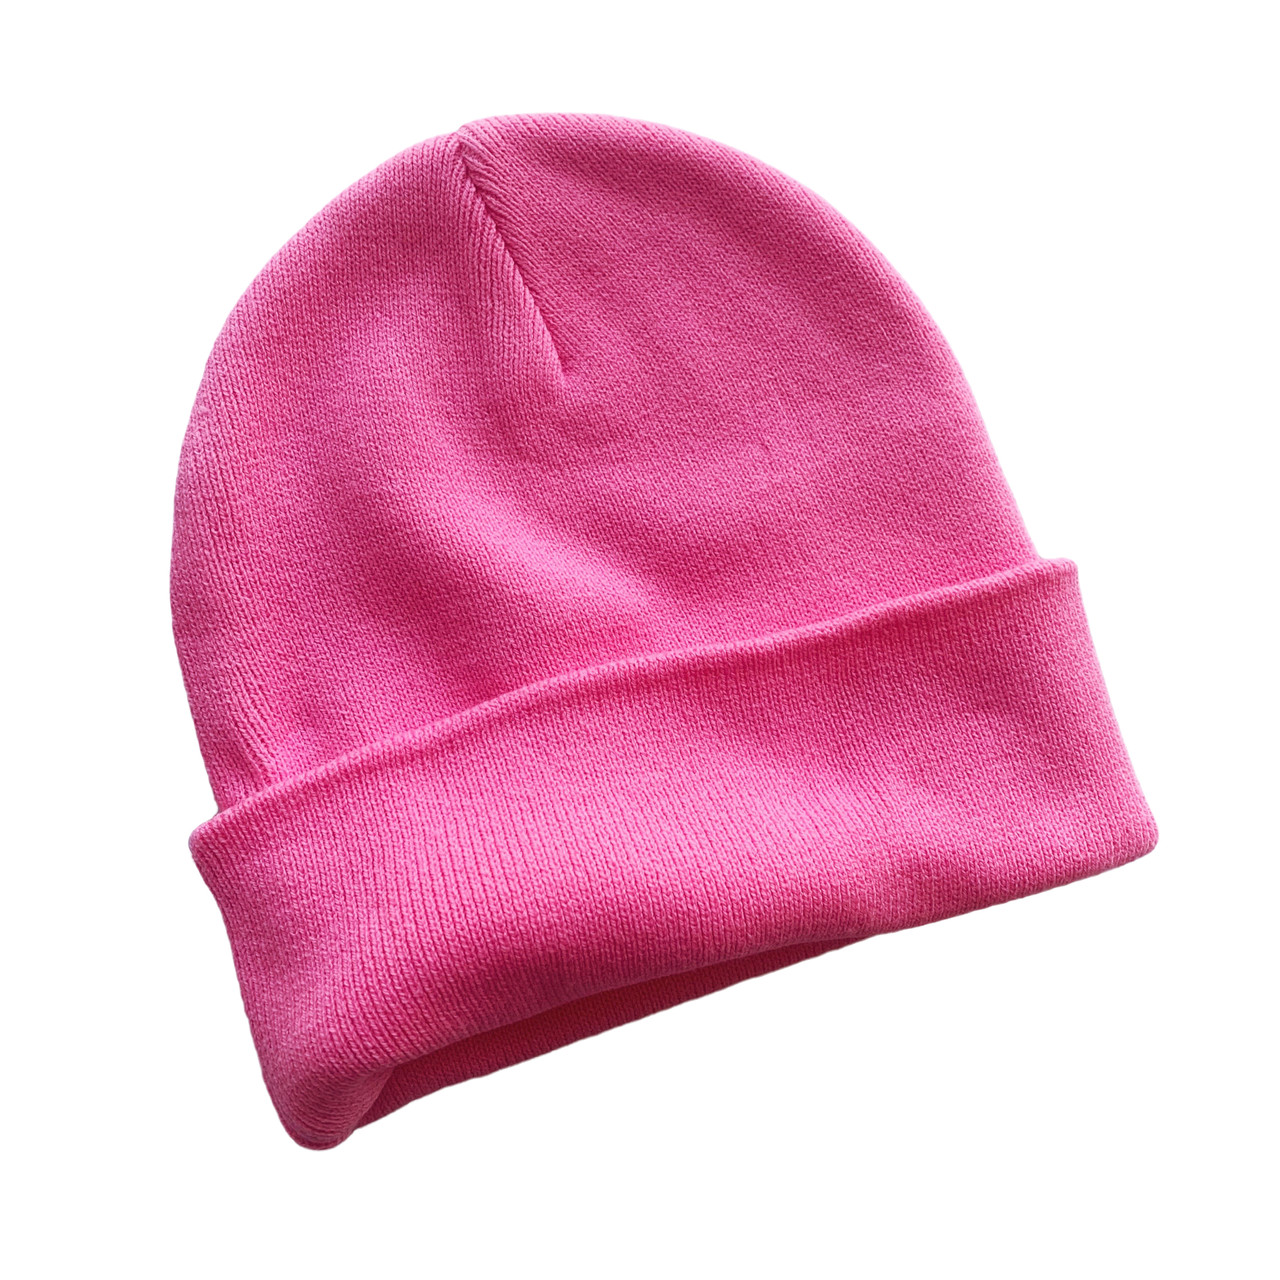 Slouchy Beanie - Hot Pink - Wildflower + Co.